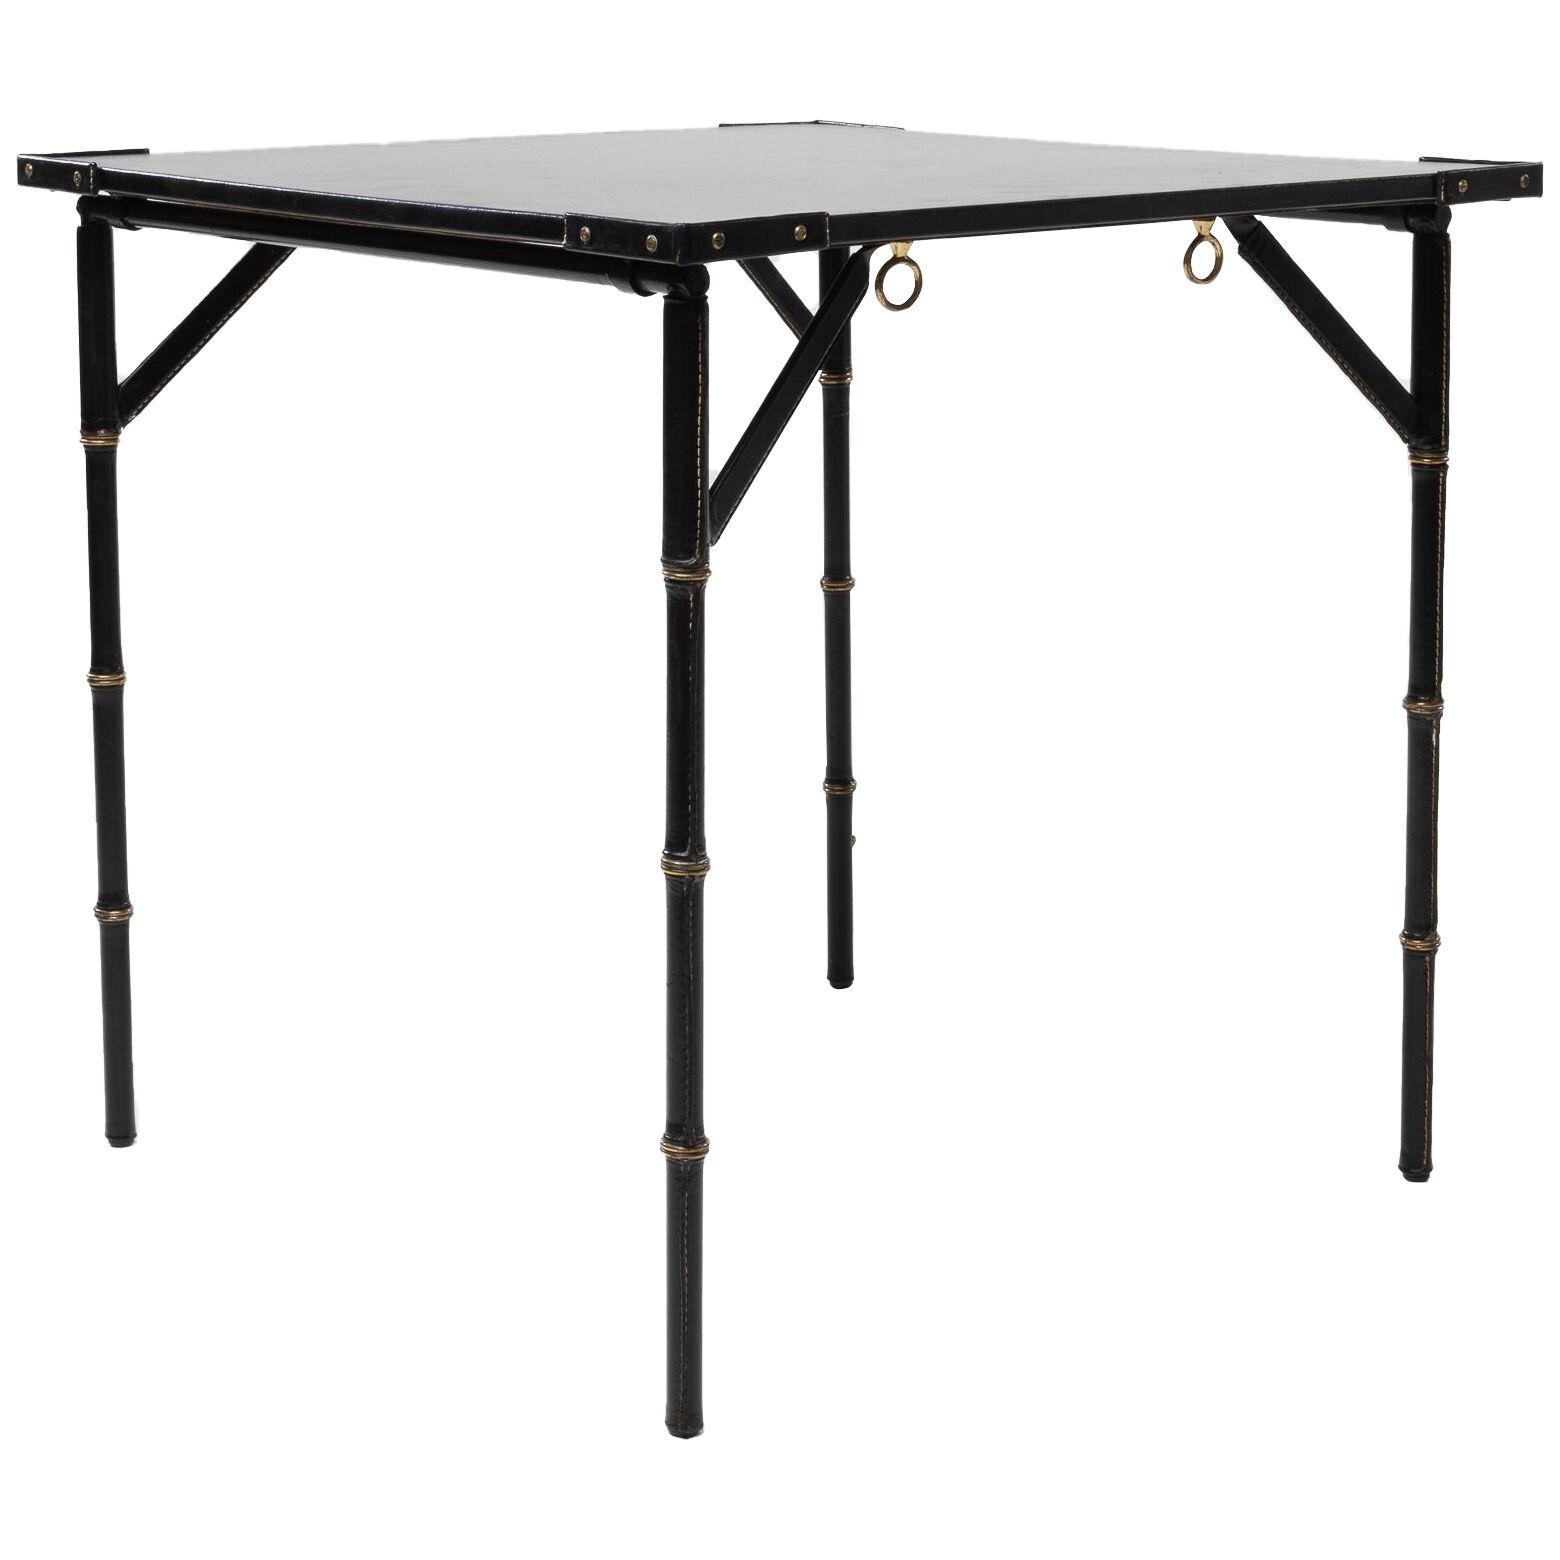 Bridge or games table with folding legs by Jacques Adnet – France